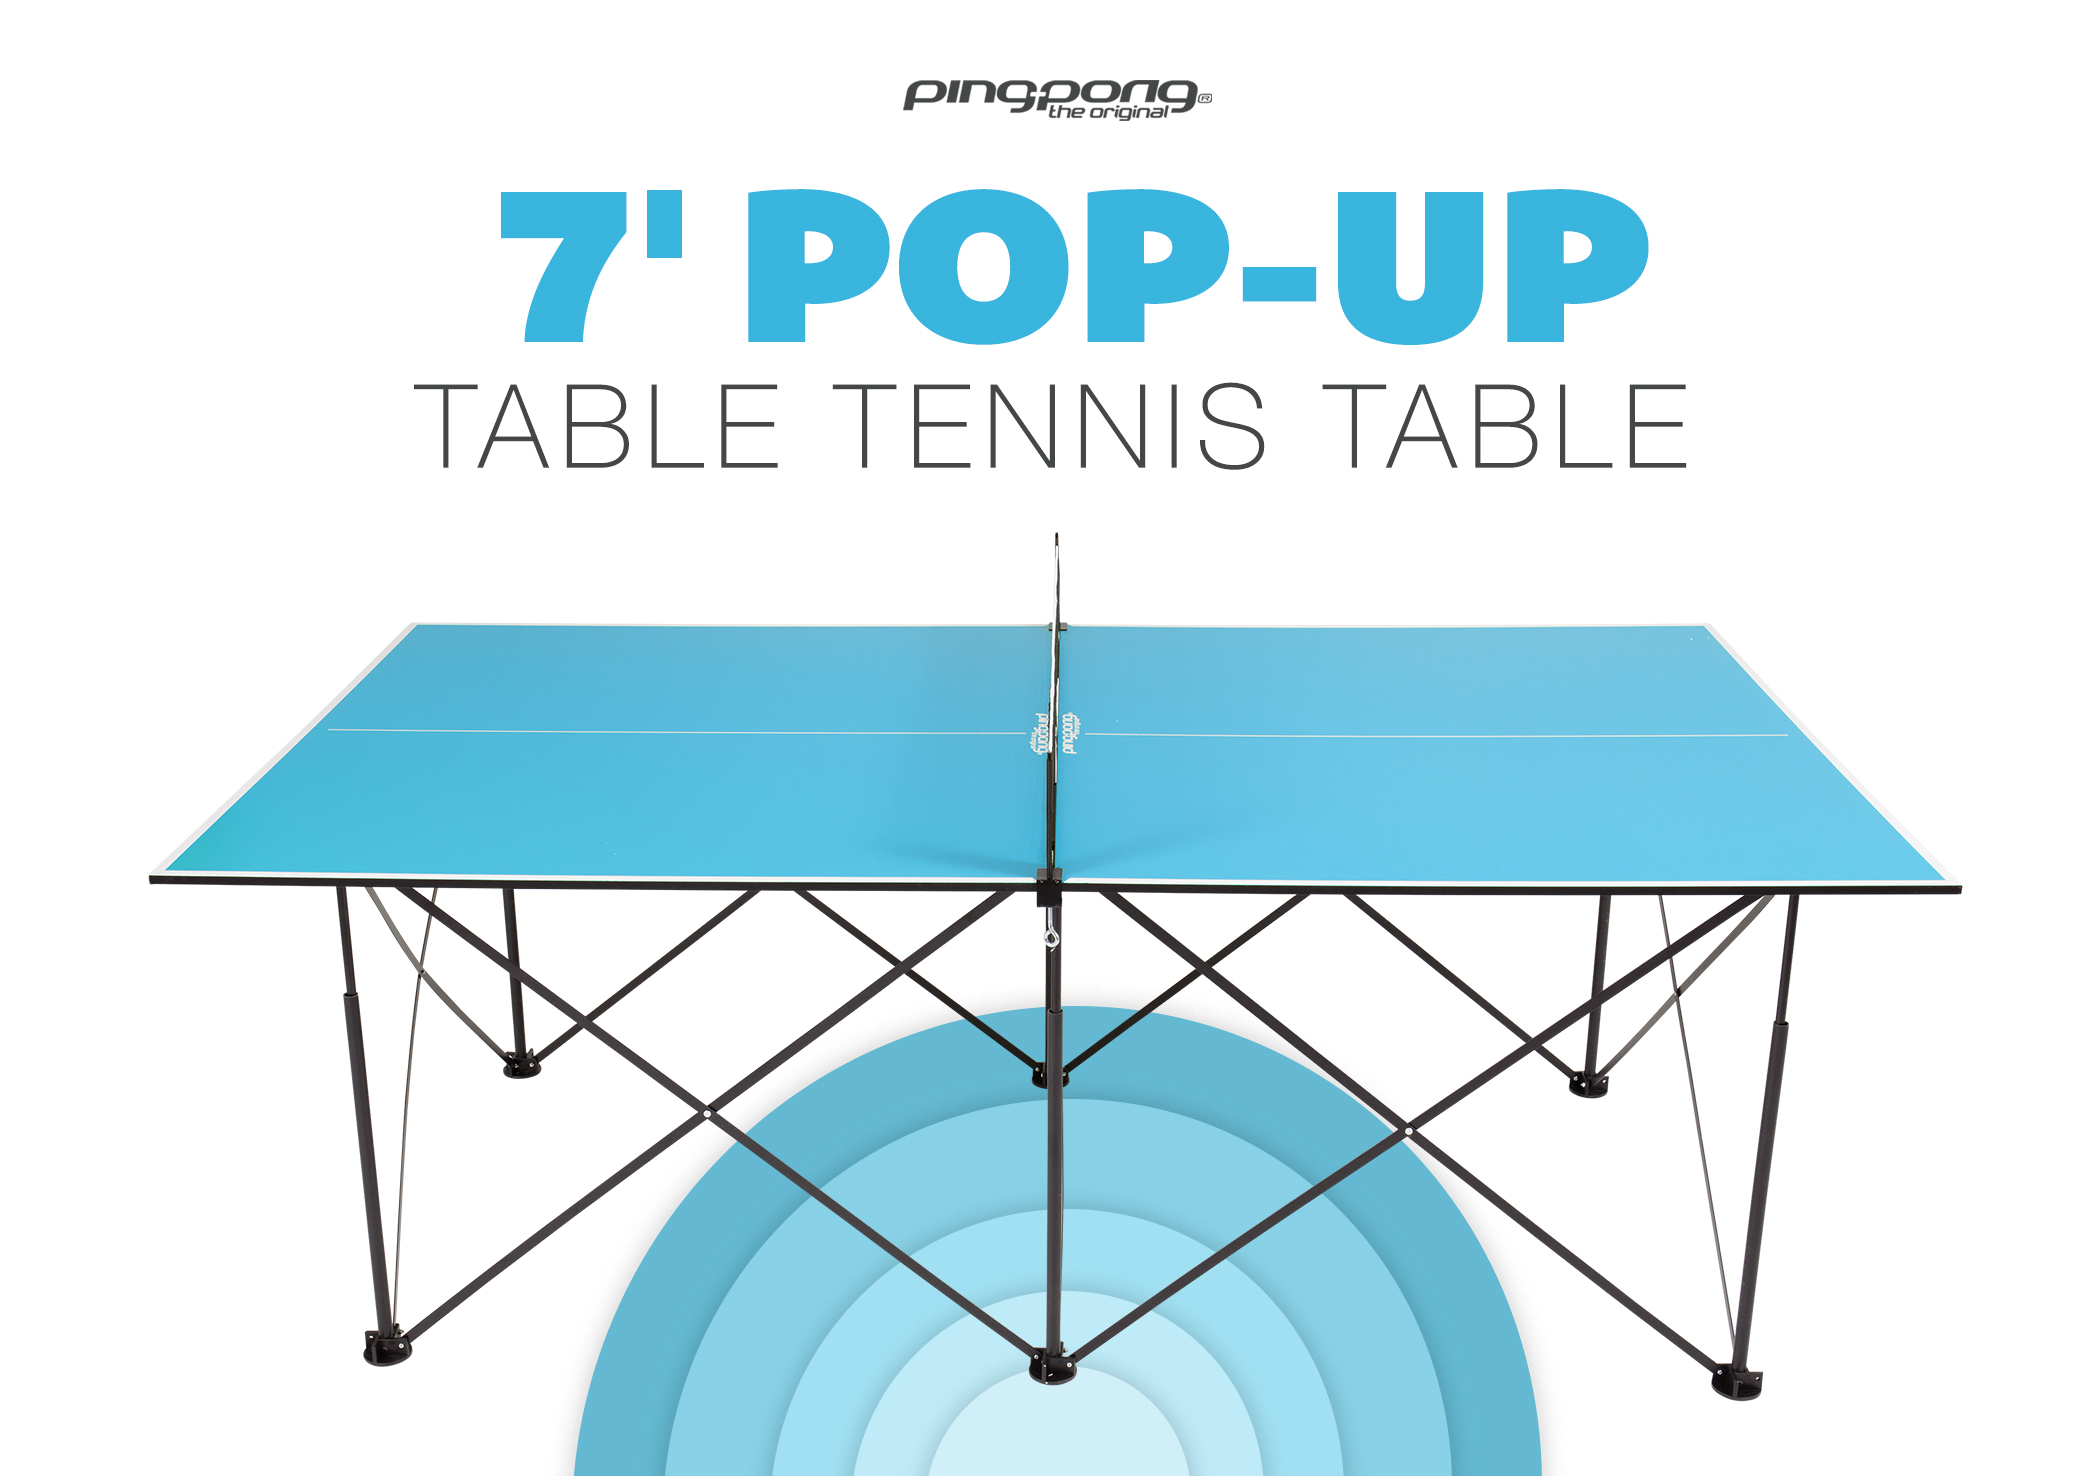 Ping-Pong 7' Instant Play Pop-Up Compact Table Tennis Table with No Tools or Assembly Required - Blue - image 10 of 14